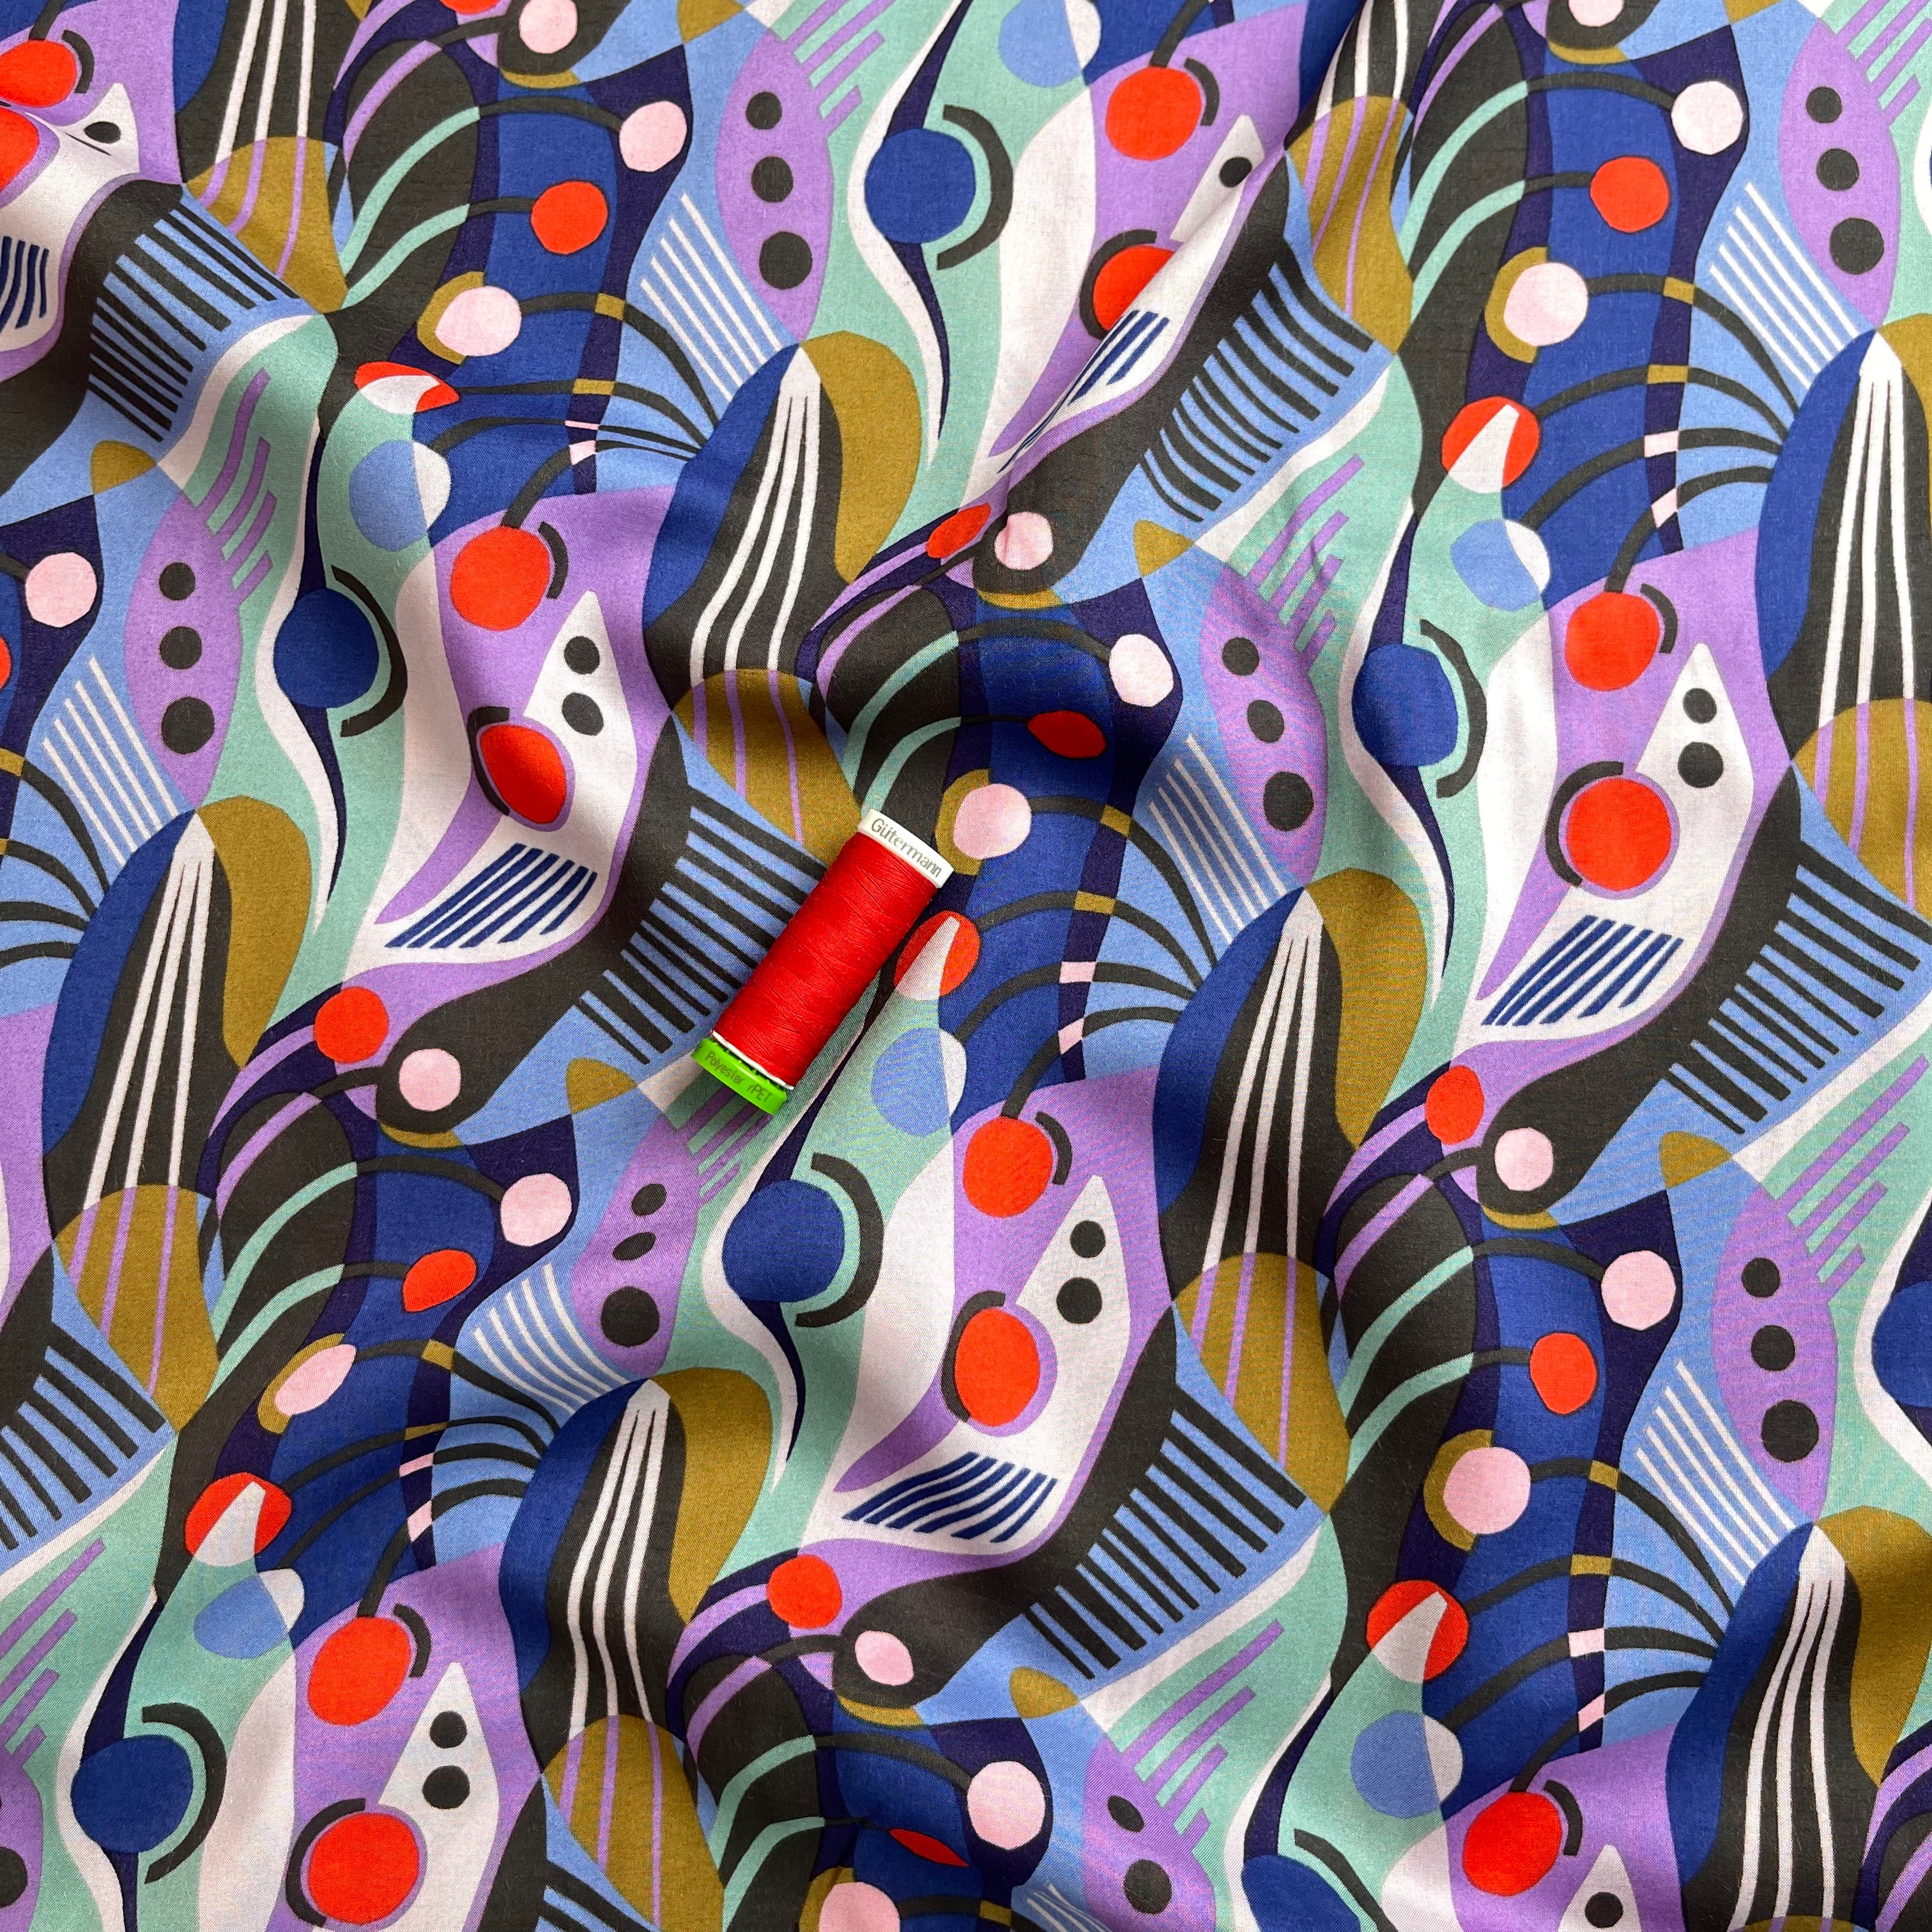 Cloud 9 Fabrics - Abstract Dreams from Wildscape Modal Rayon